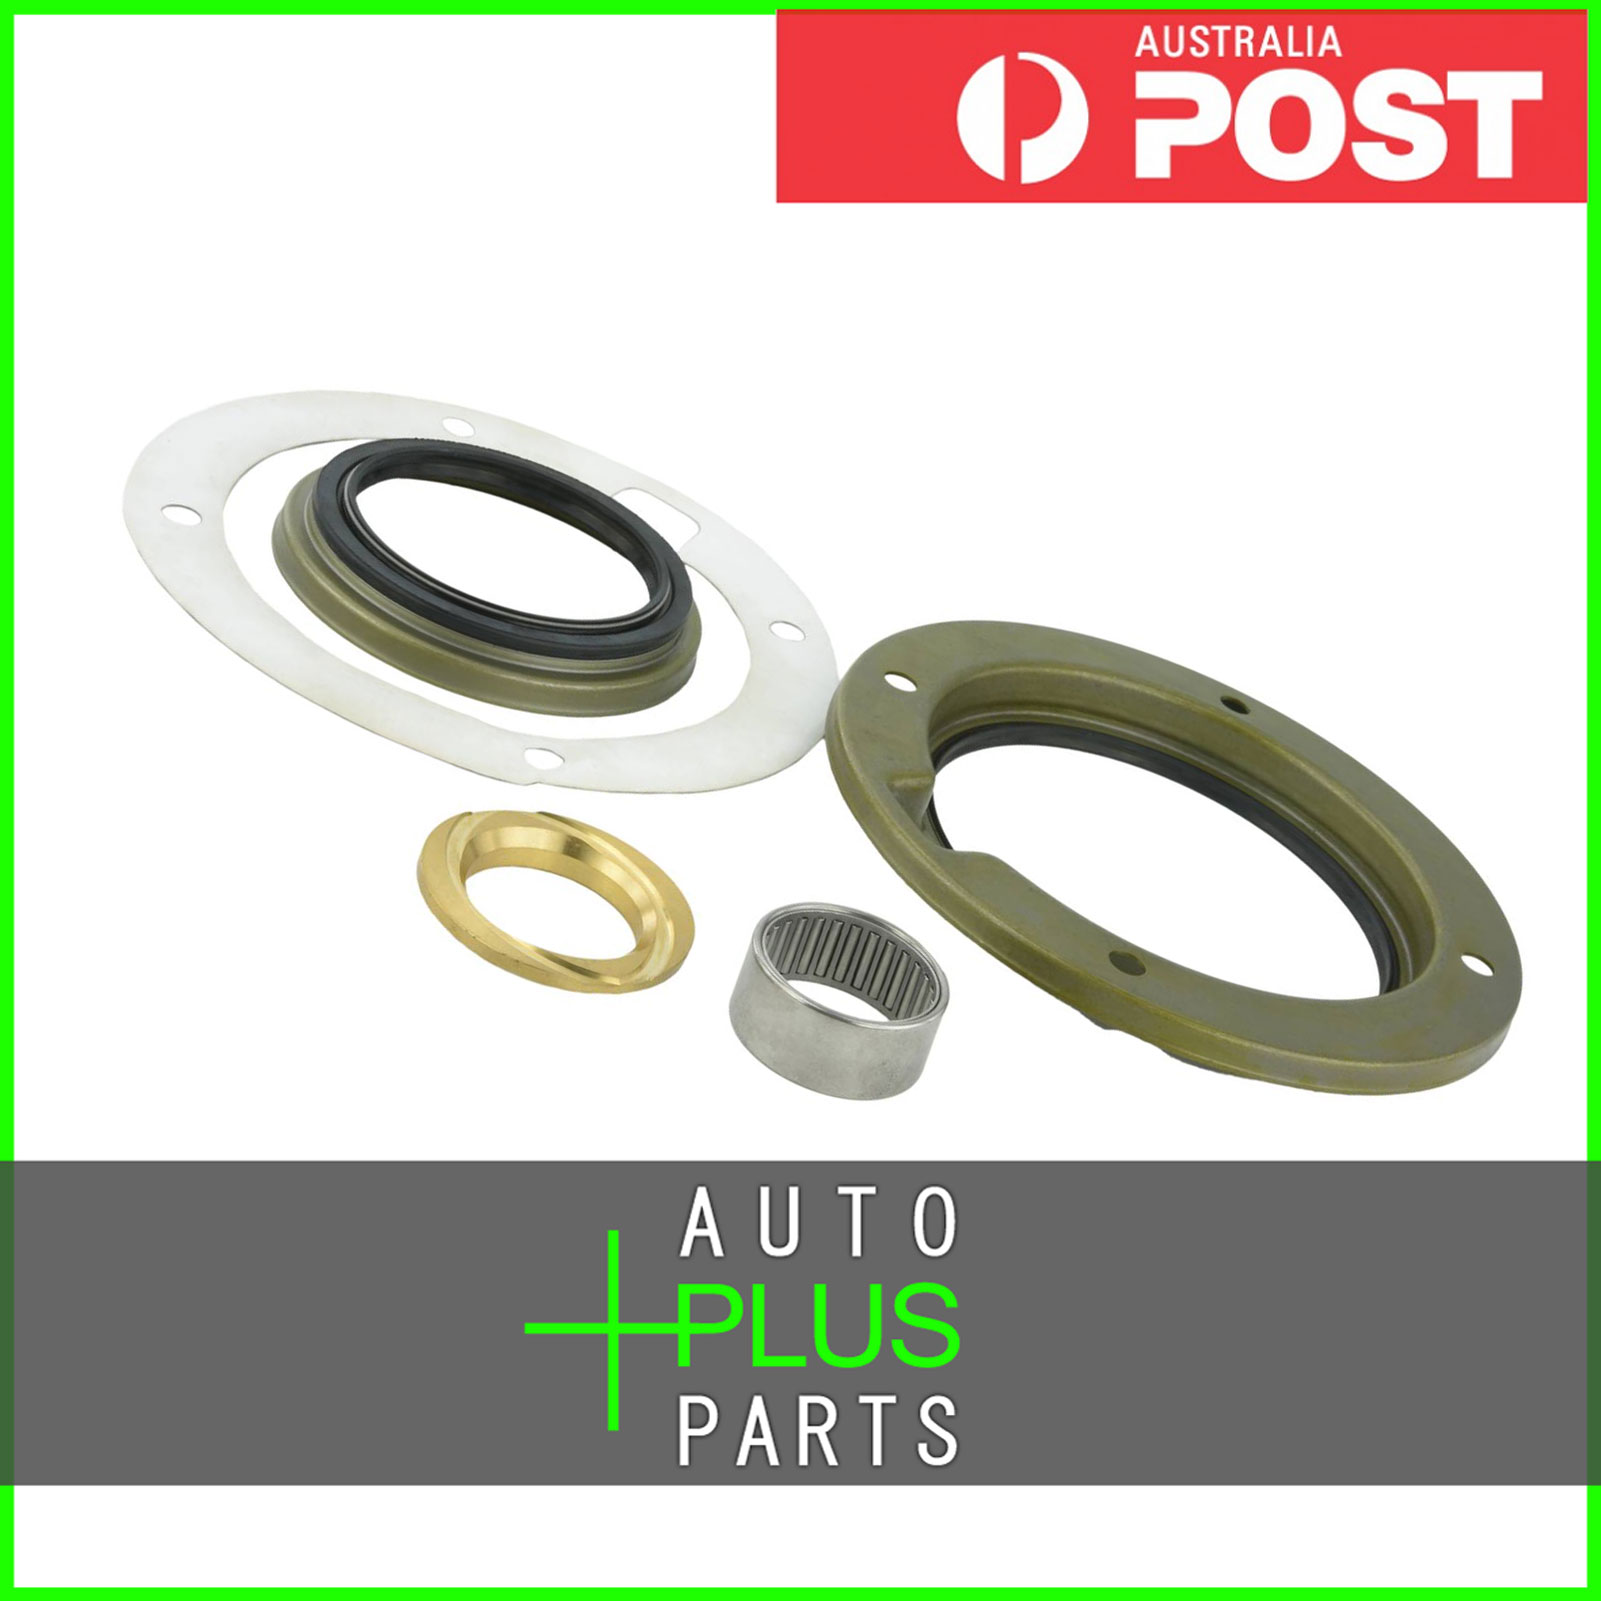 Fits TOYOTA LAND CRUISER 70 GRJ7# 1990- - STEERING KNUCKLE REPAIR KIT Product Photo